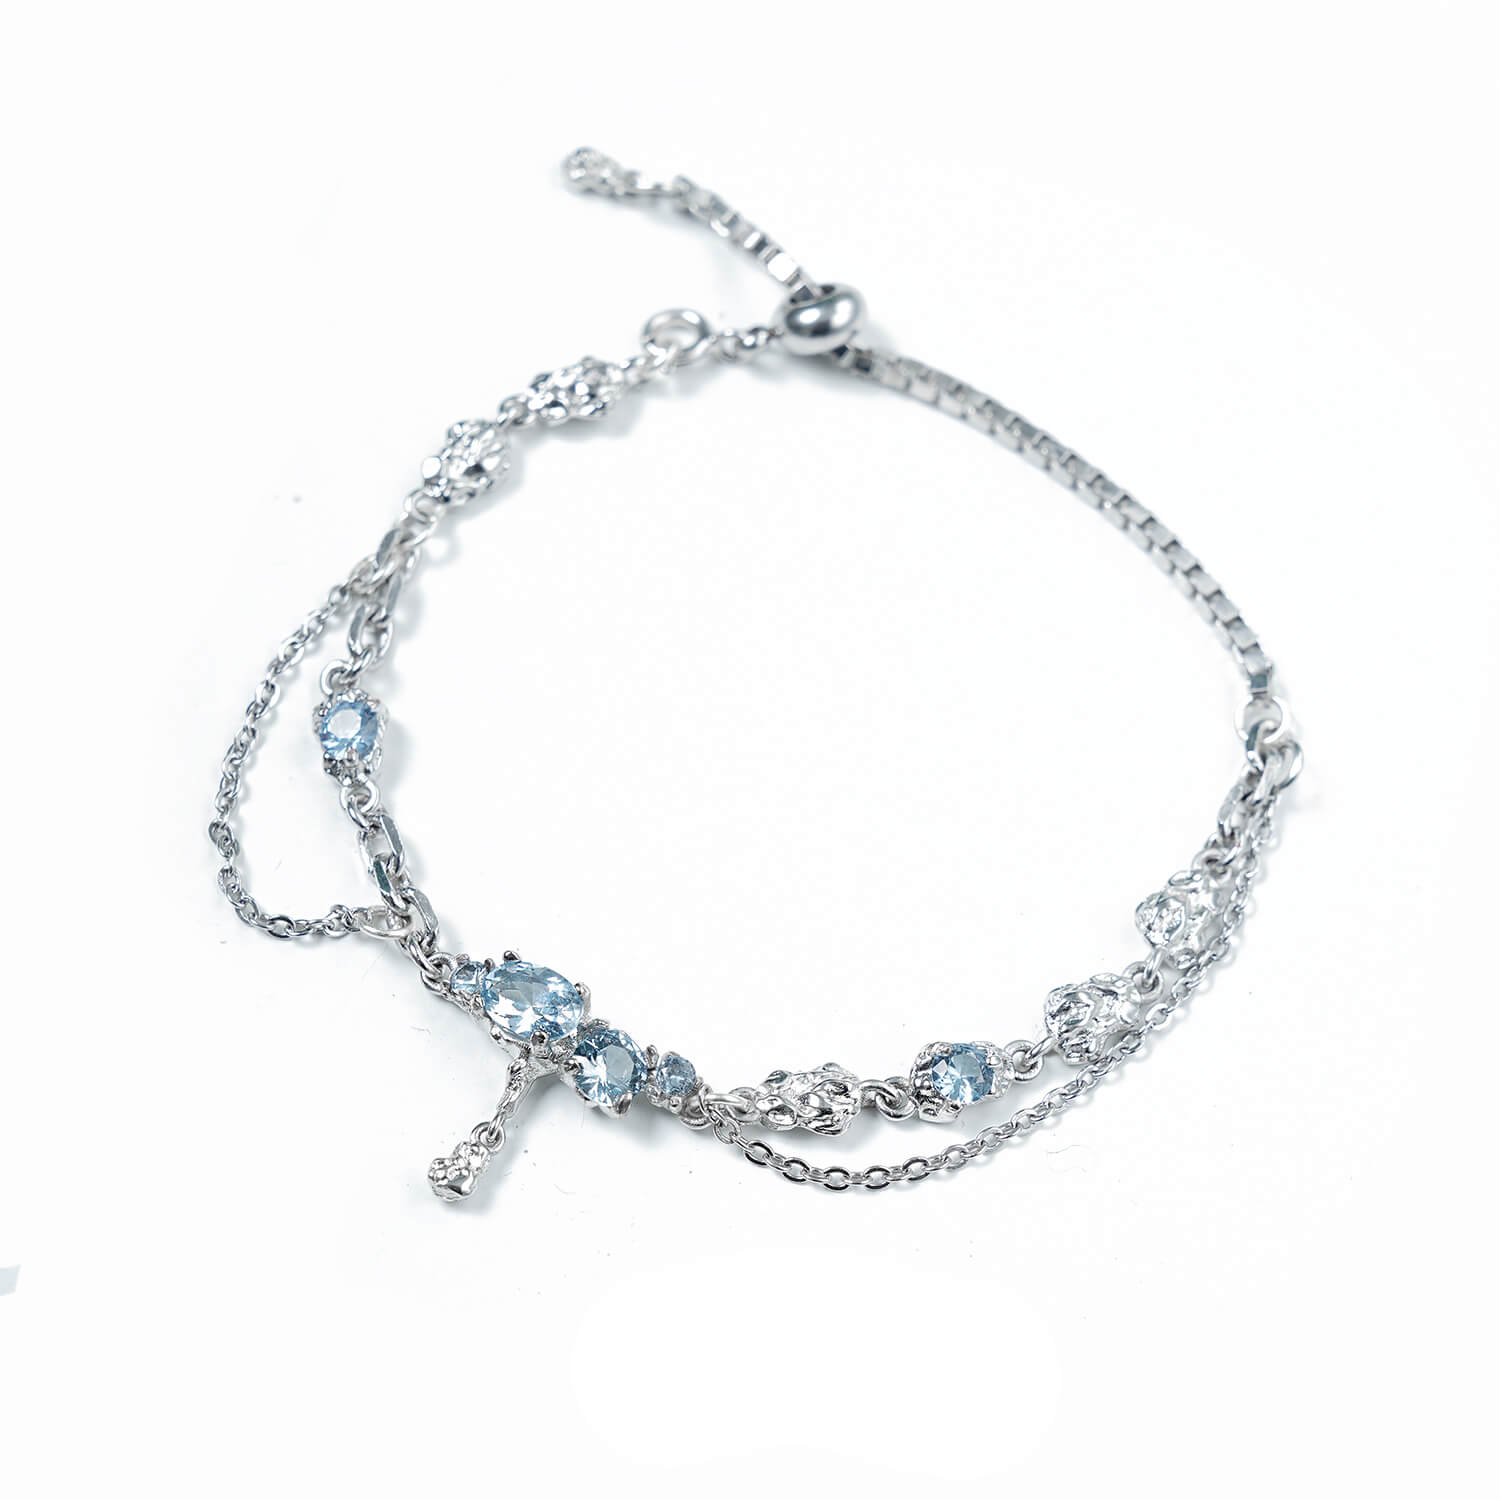 Ice Blue Zircon Bracelet Sparkling Accessories for Your Everyday Style  Buy at Khanie